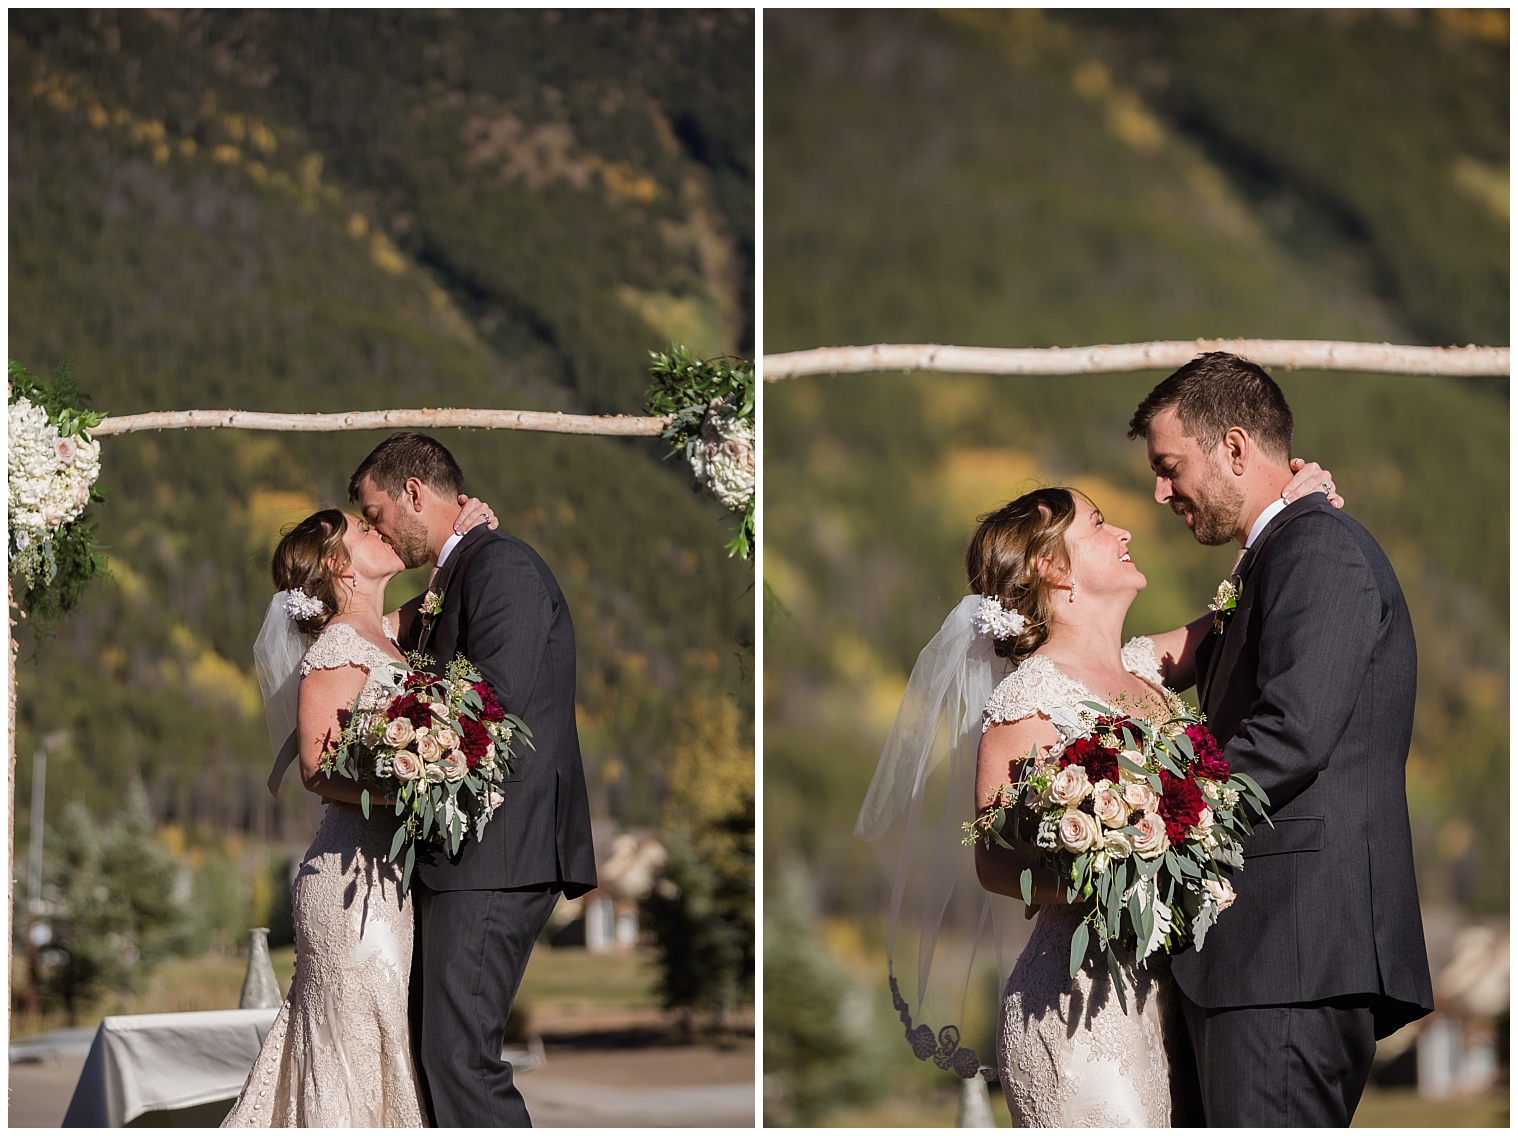 The wedding couple have their first kiss during their Copper Mountain wedding ceremony.